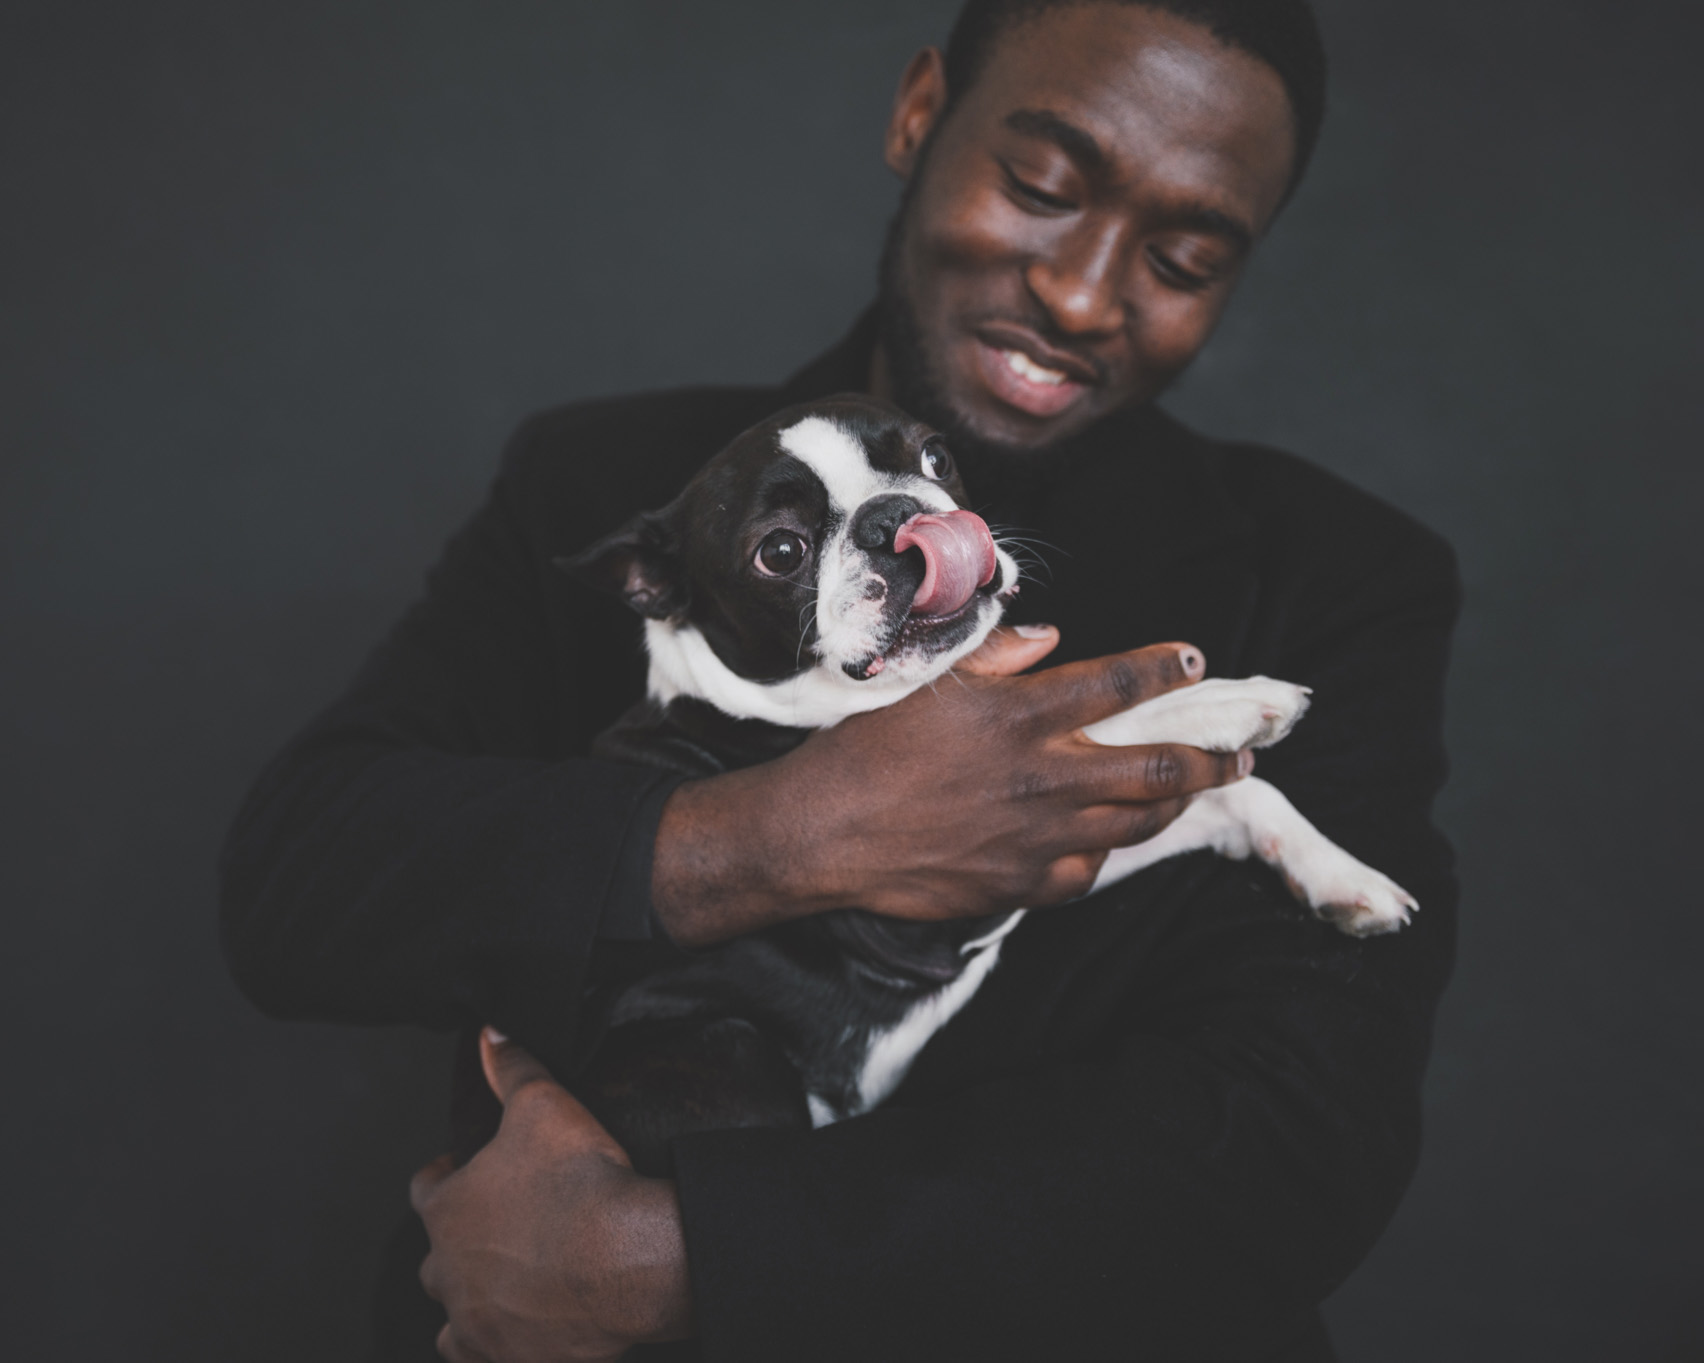 A man holding a pug licking its lips